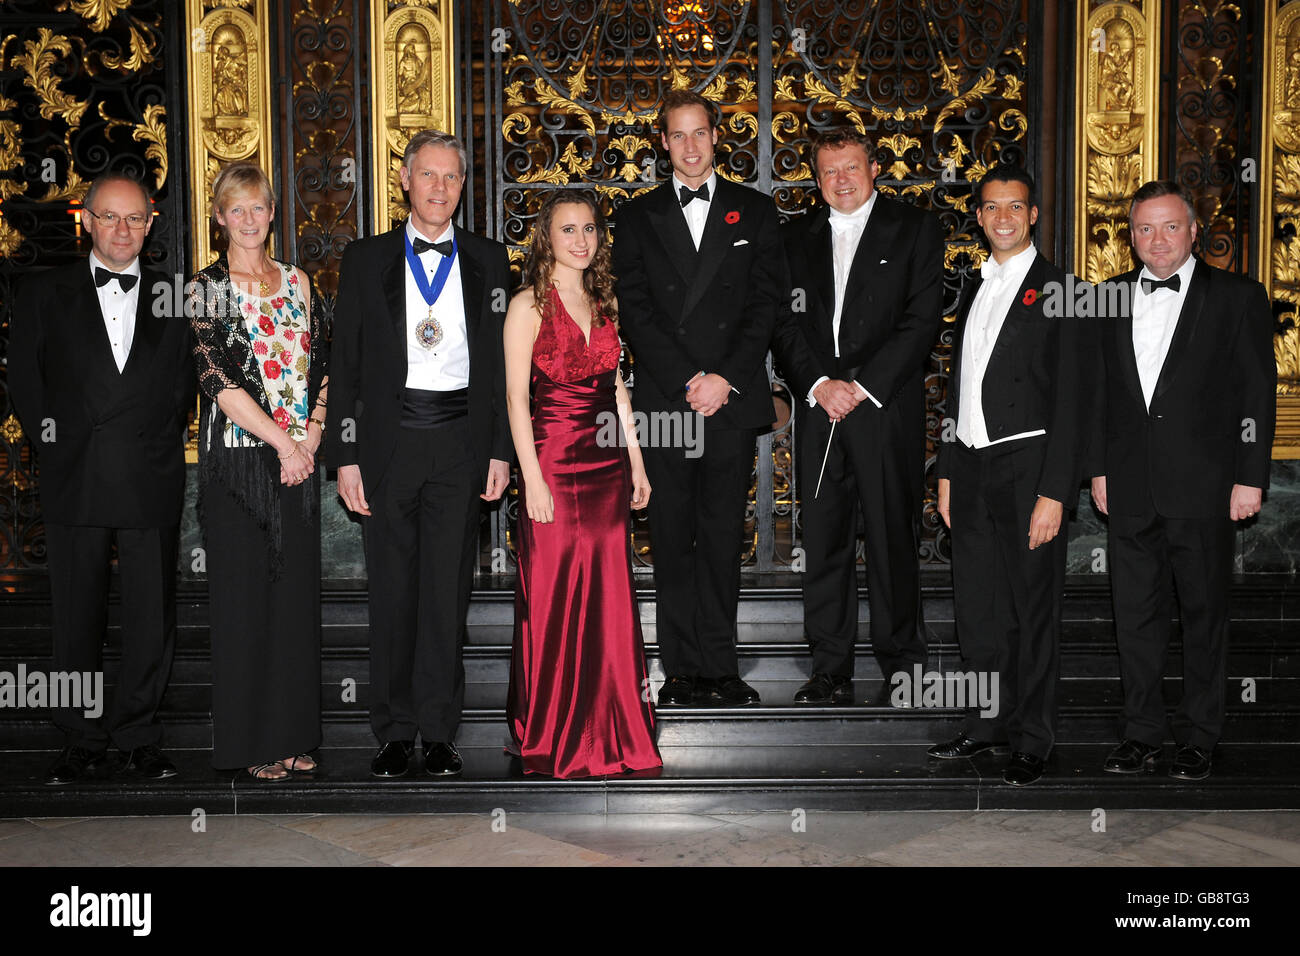 (left to right) Musical Director of the Philharmonia Orchestra, David Welton, Lady Mayor, Theresa Lewis, Mayor David Lewis, solo violinist Jennifer Pike, Prince William, Conductor of the Bach Orchestra Richard Hickcox, Baritone Roderick Williams and David Hill, Musical Director of the Bach Choir at the Lord Mayor's Appeal 2008 grand finale evening tonight. Stock Photo